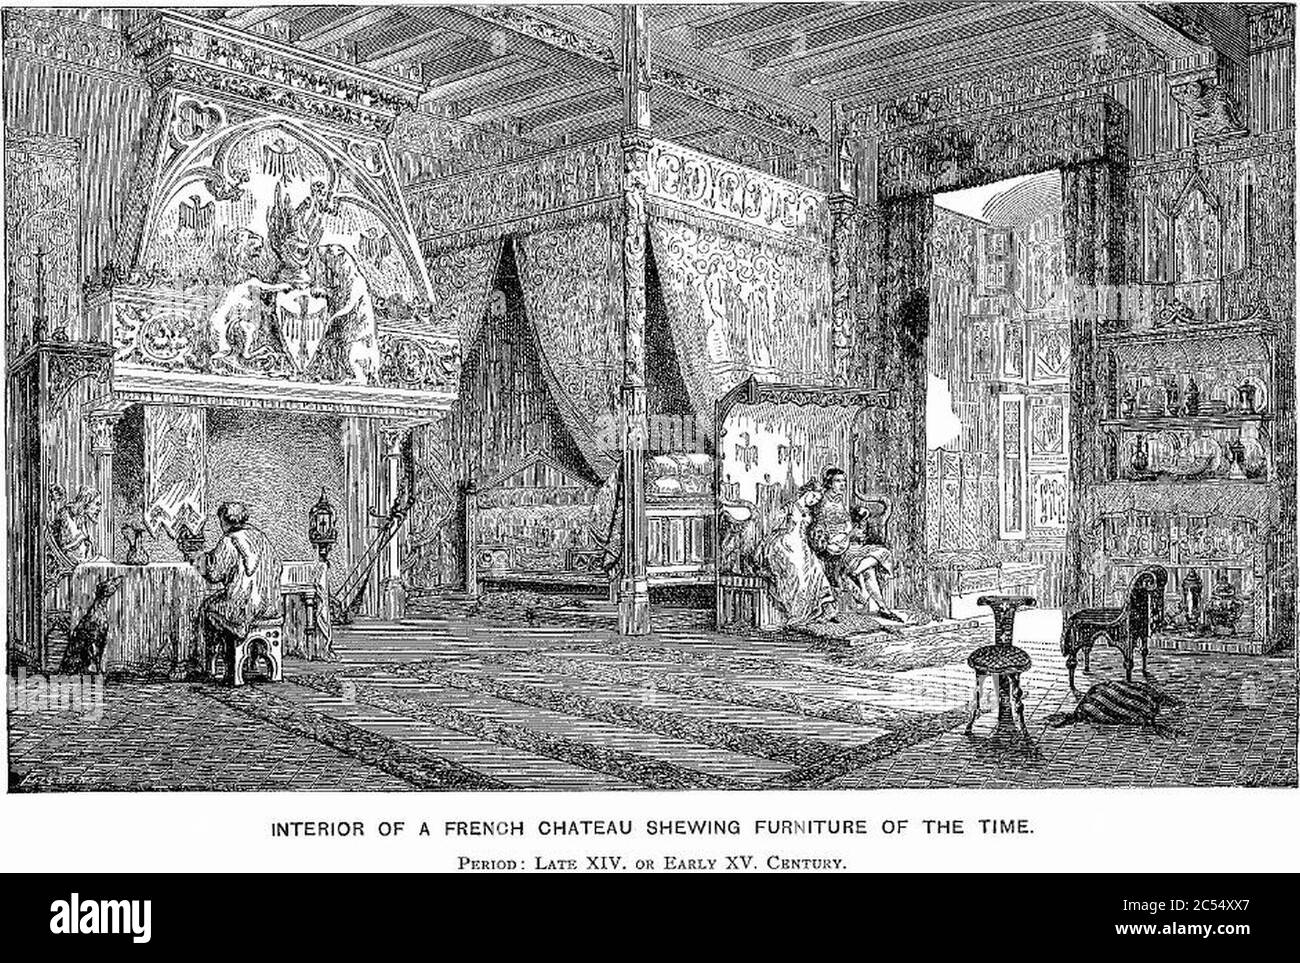 Interior of a French Chateau Shewing Furniture of the Time. Stock Photo